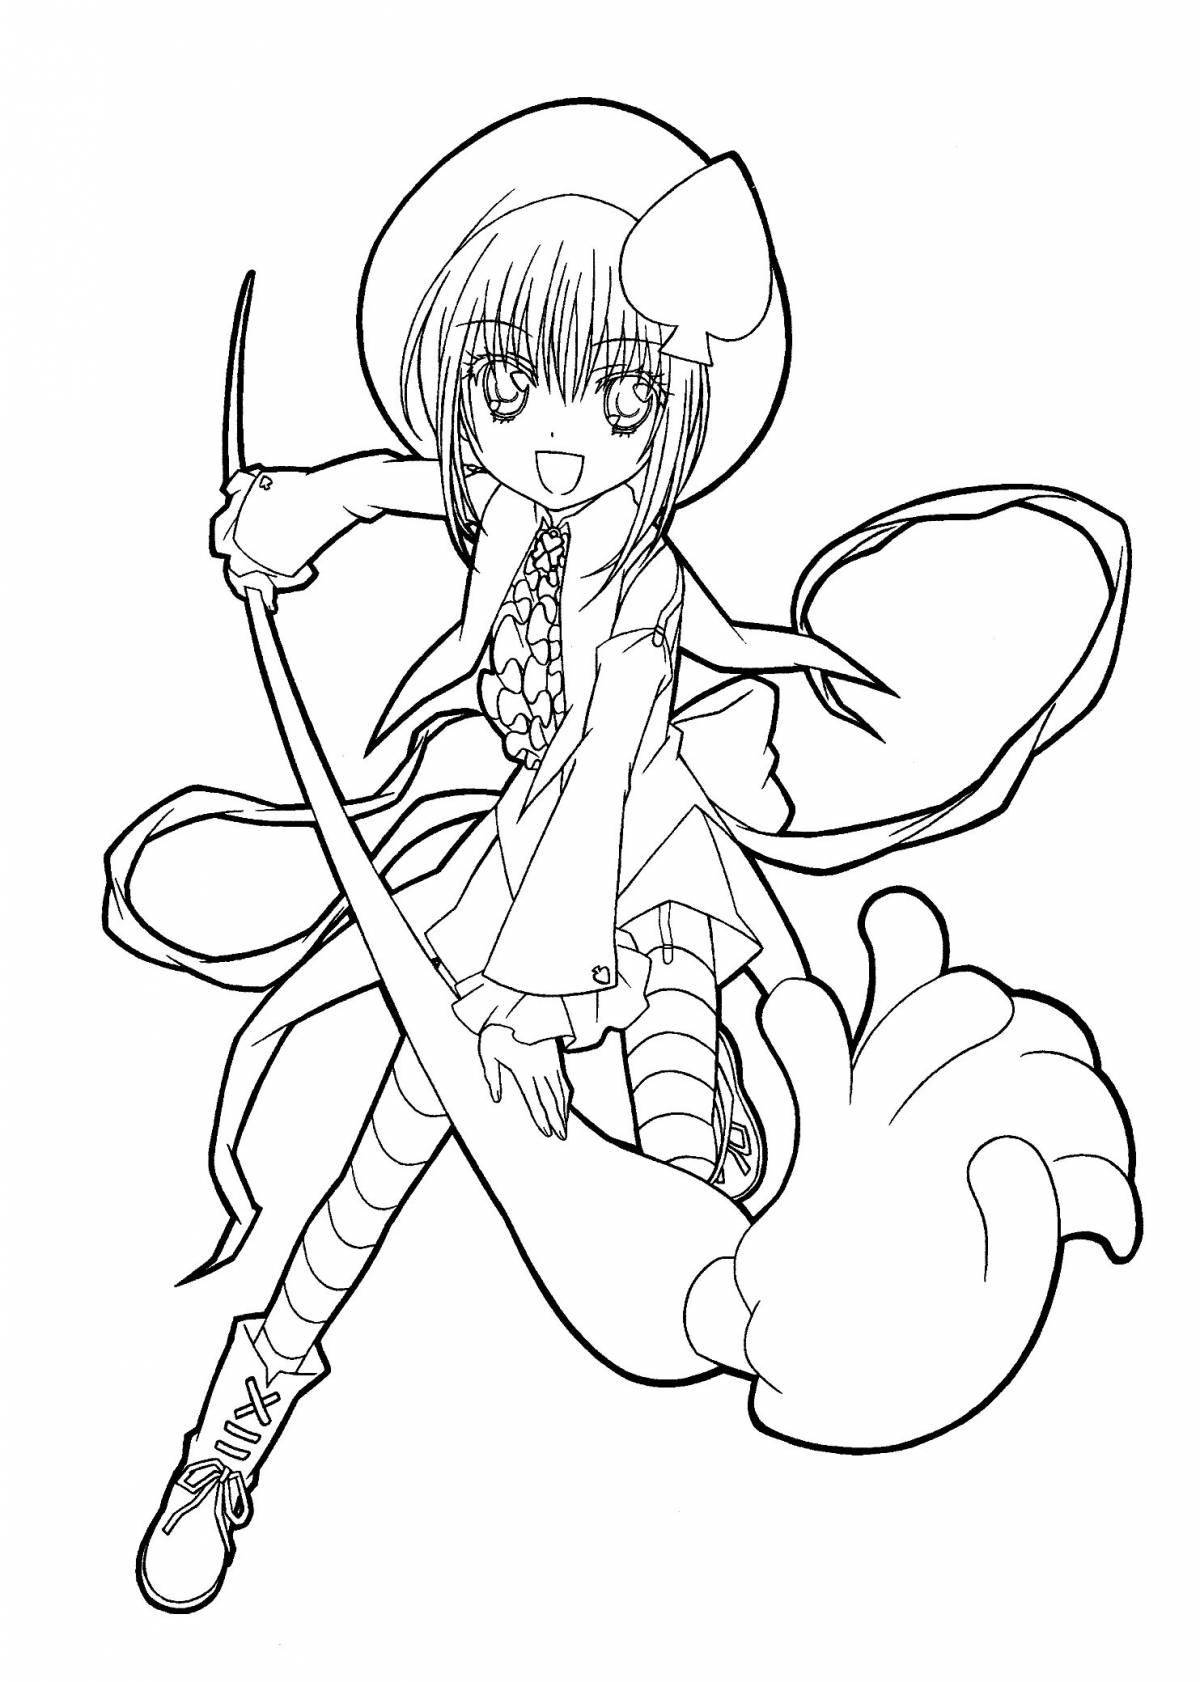 Coloring book gorgeous chara